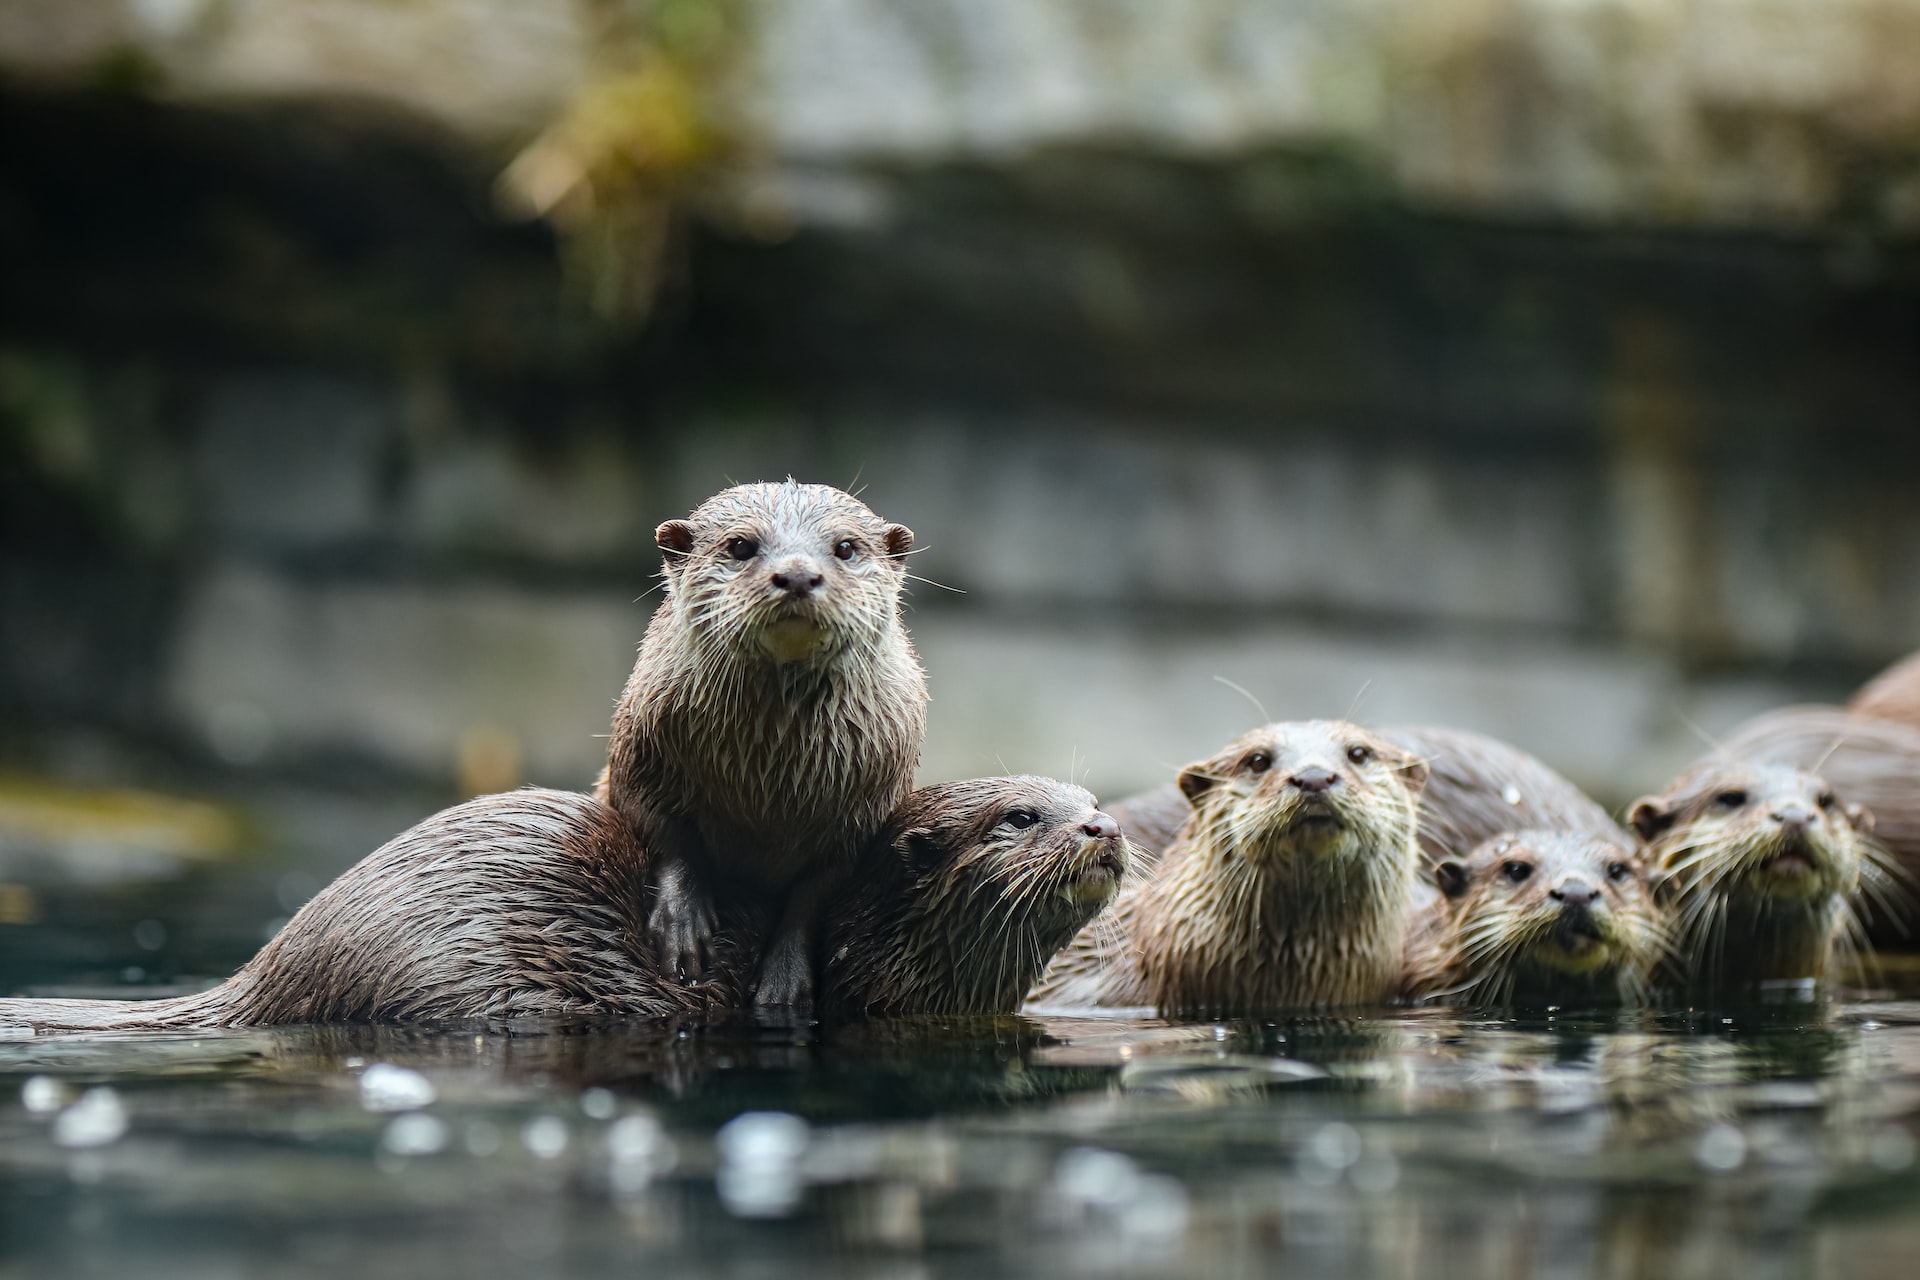 The Playful and Aquatic Creatures: A Look at the Social and Adapted Otter